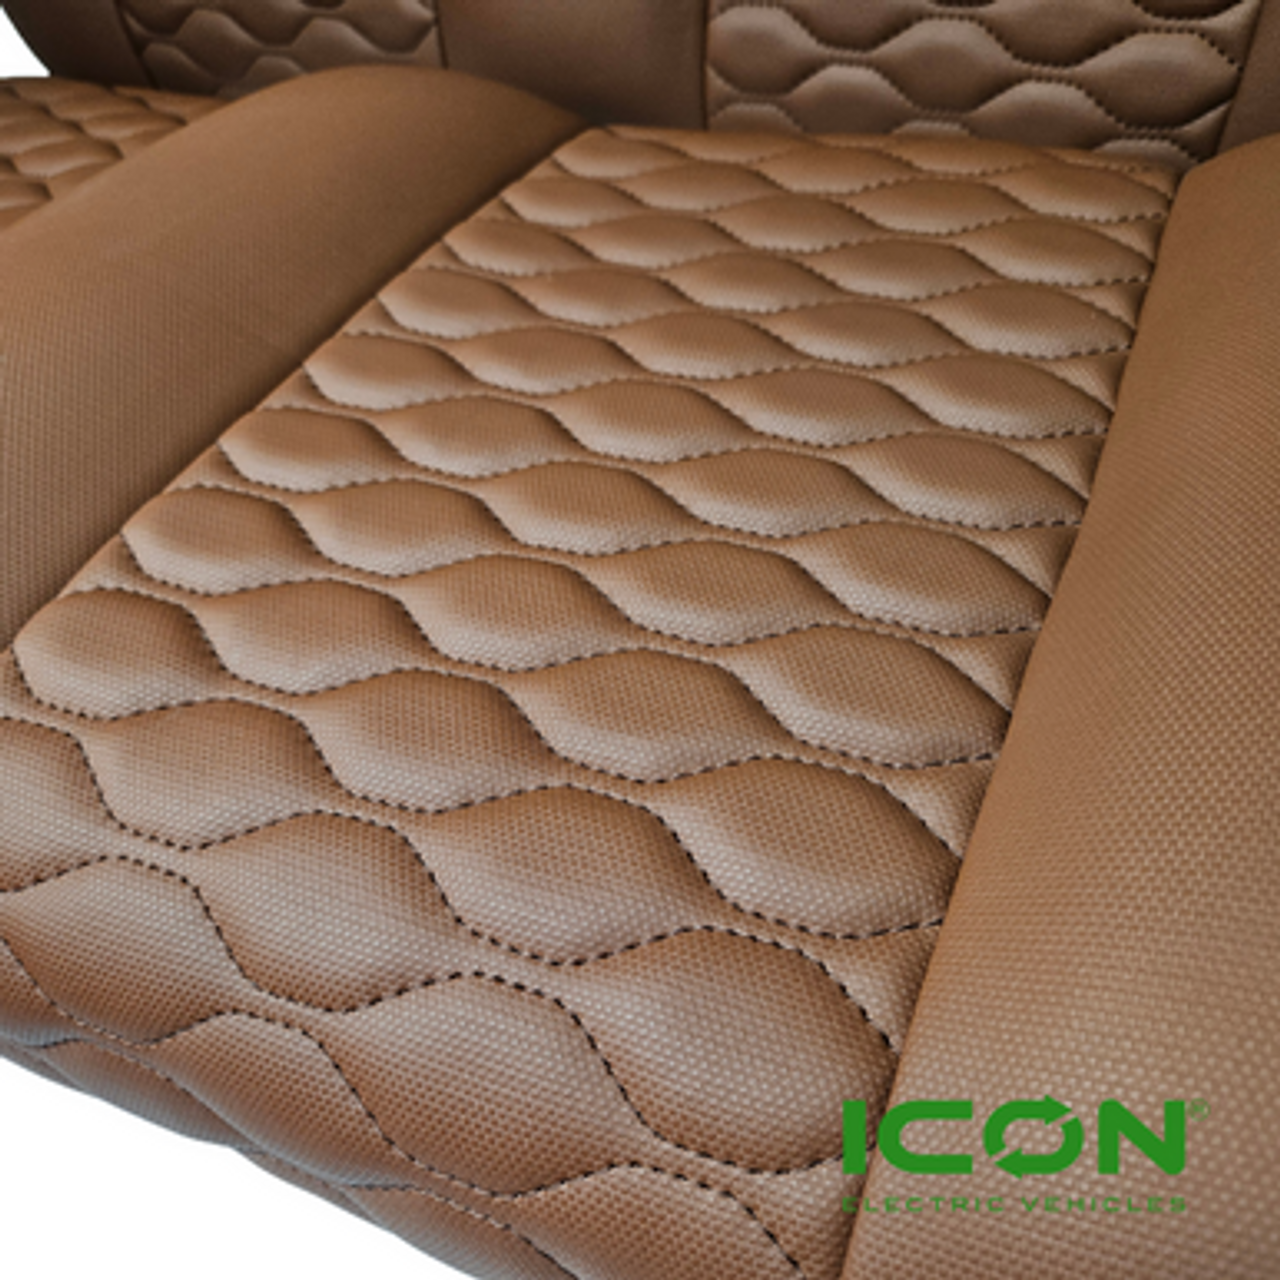 ICON Chestnut Comfort Custom Seat Cool Touch Base with Stretch Hex Pattern and Dark Brown Stitching, STC-CHTHEXDBR-IC-COMF